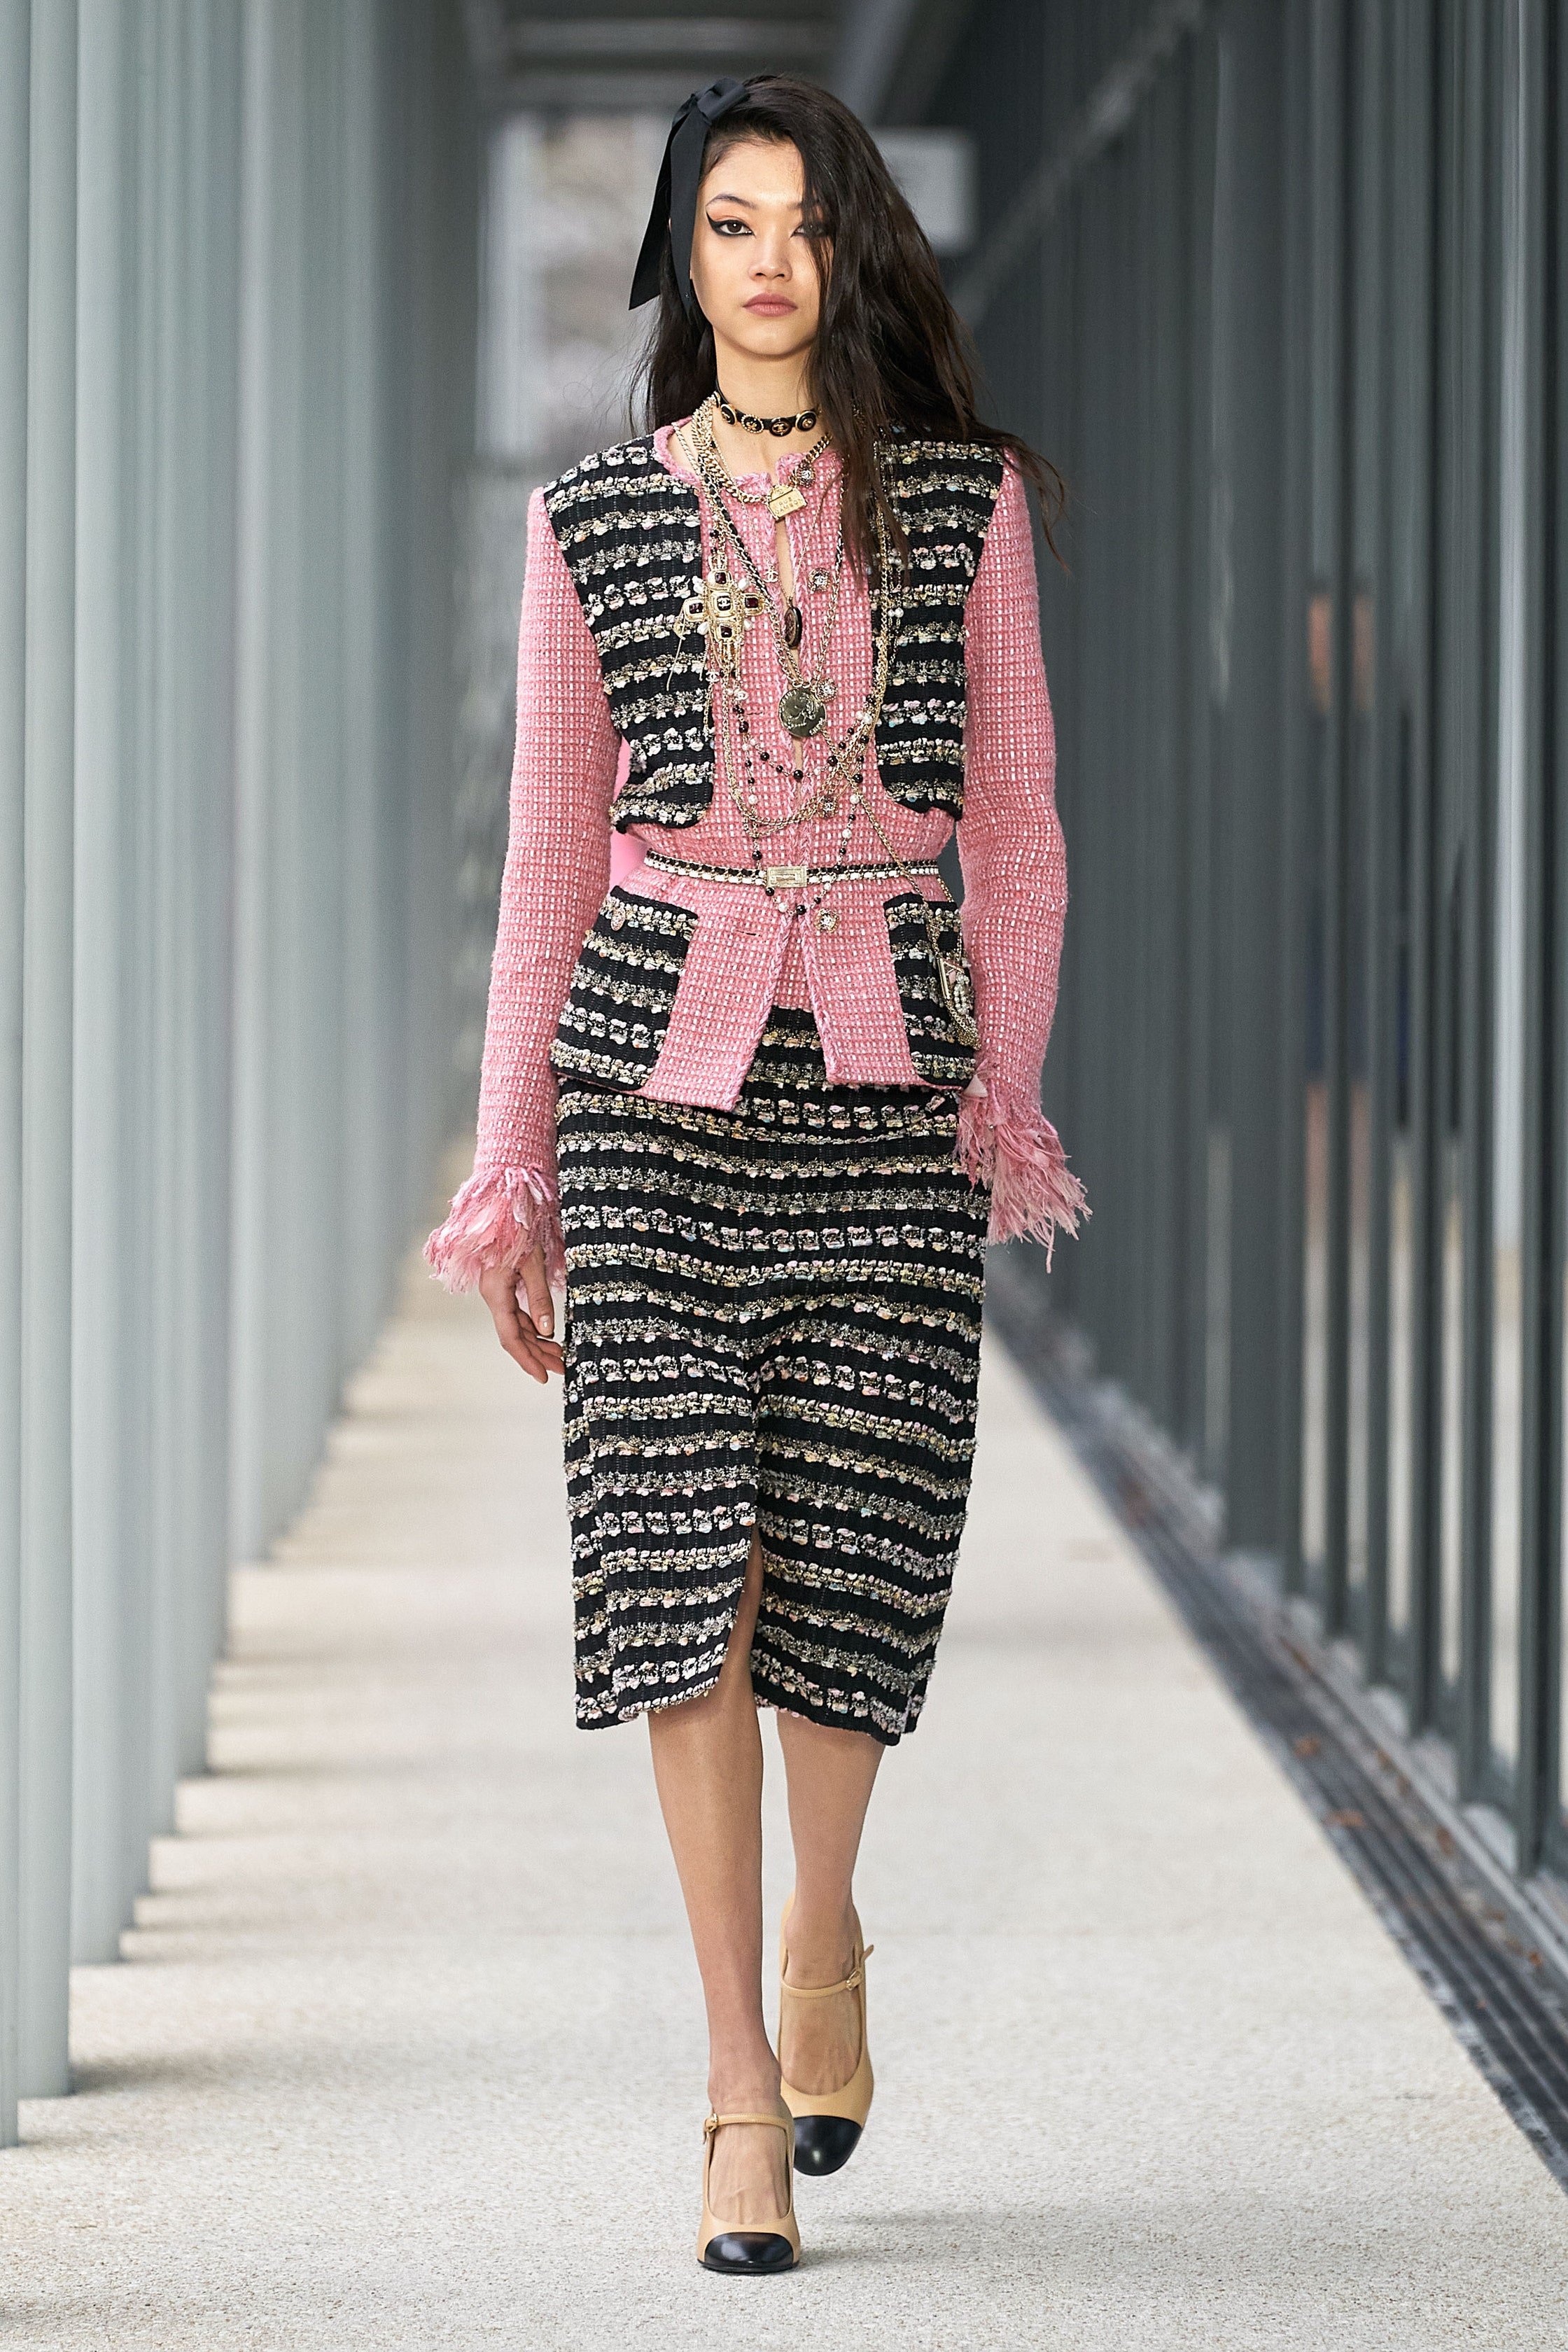 Chanel presents the Fall-Winter 2022/23 ready-to-wear collection